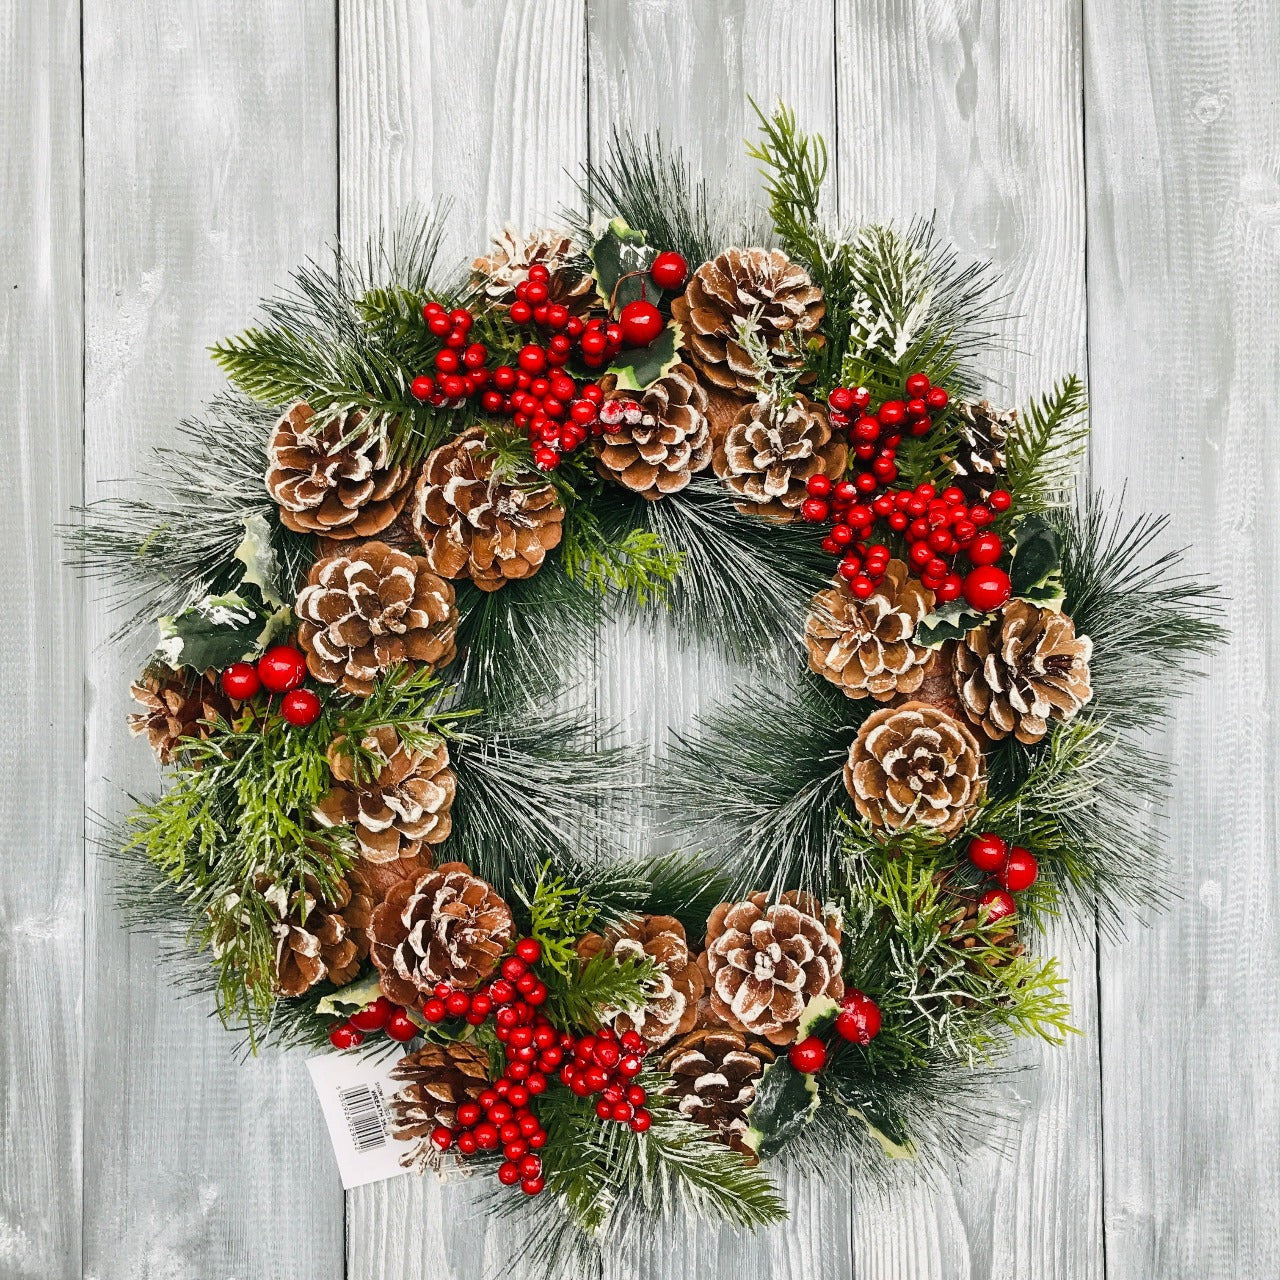 Enchante Christmas Wreath - Snow Kissed Foliage  Beautiful Christmas Wreath - with pine cones, berries - all with a frosting of snow